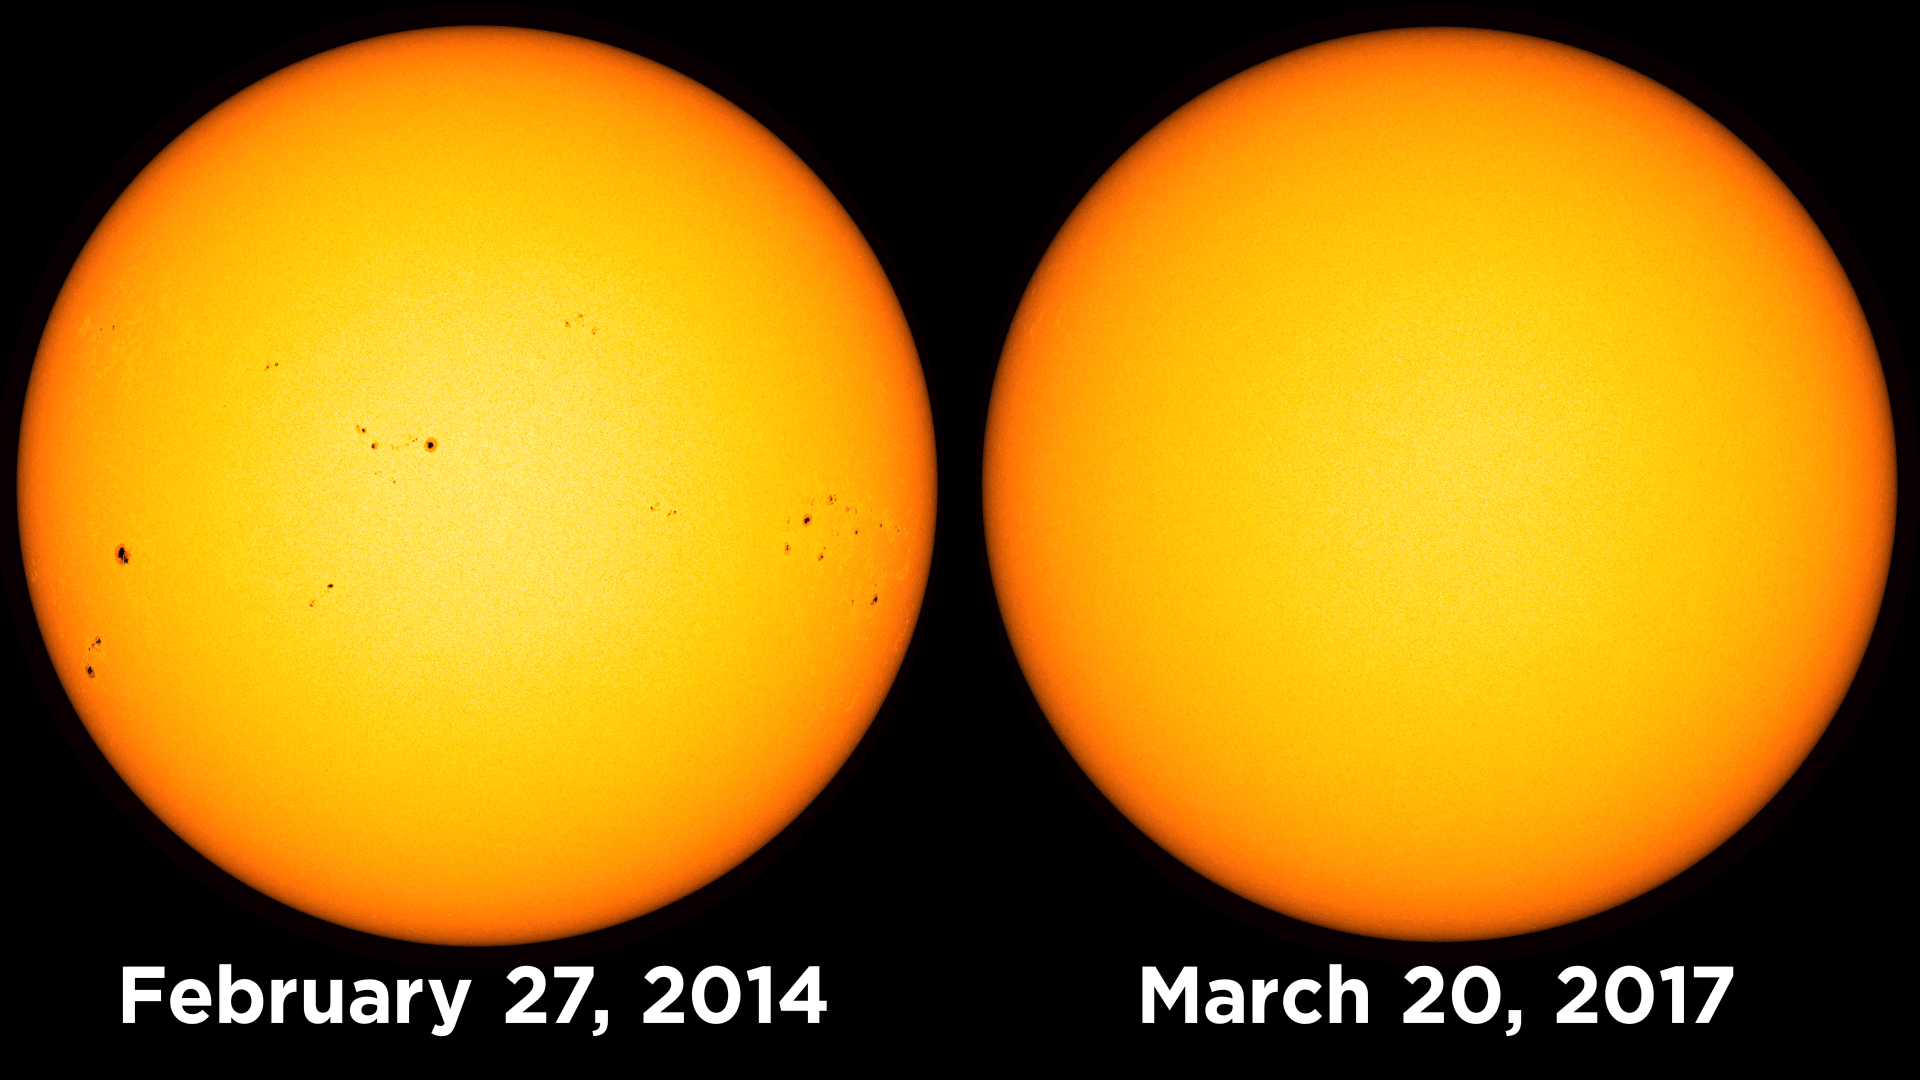 This side-by-side animation shows sunspots on the sun on Feb. 27, 2014 (left) and the sunspot-less day of March 20, 2017 as seen by NASA's Solar Dynamics Observatory.